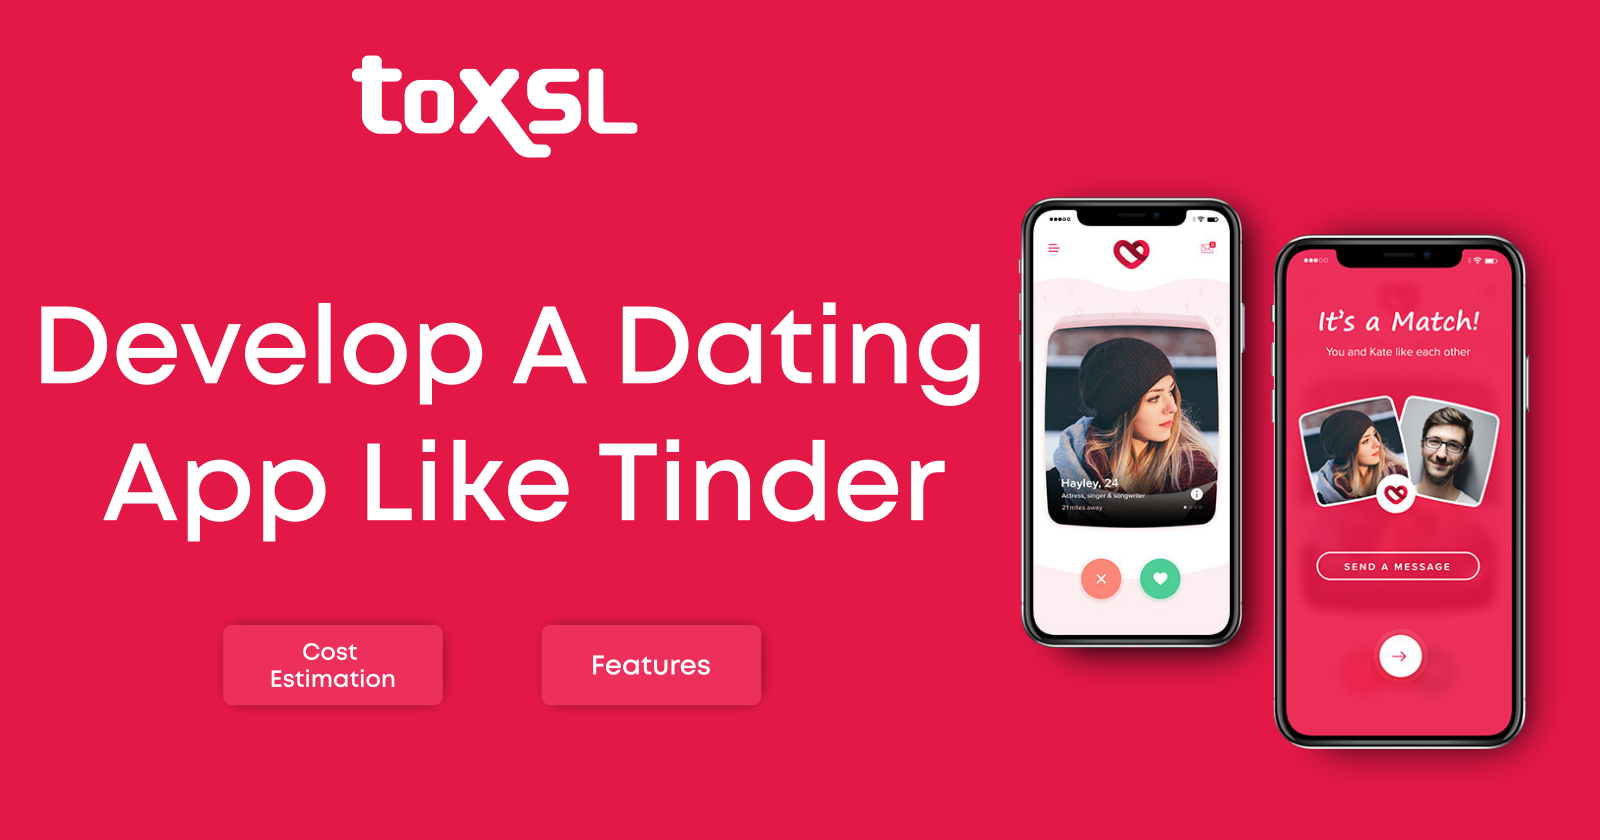 Learn About the Cost and Features of a Dating App like Tinder